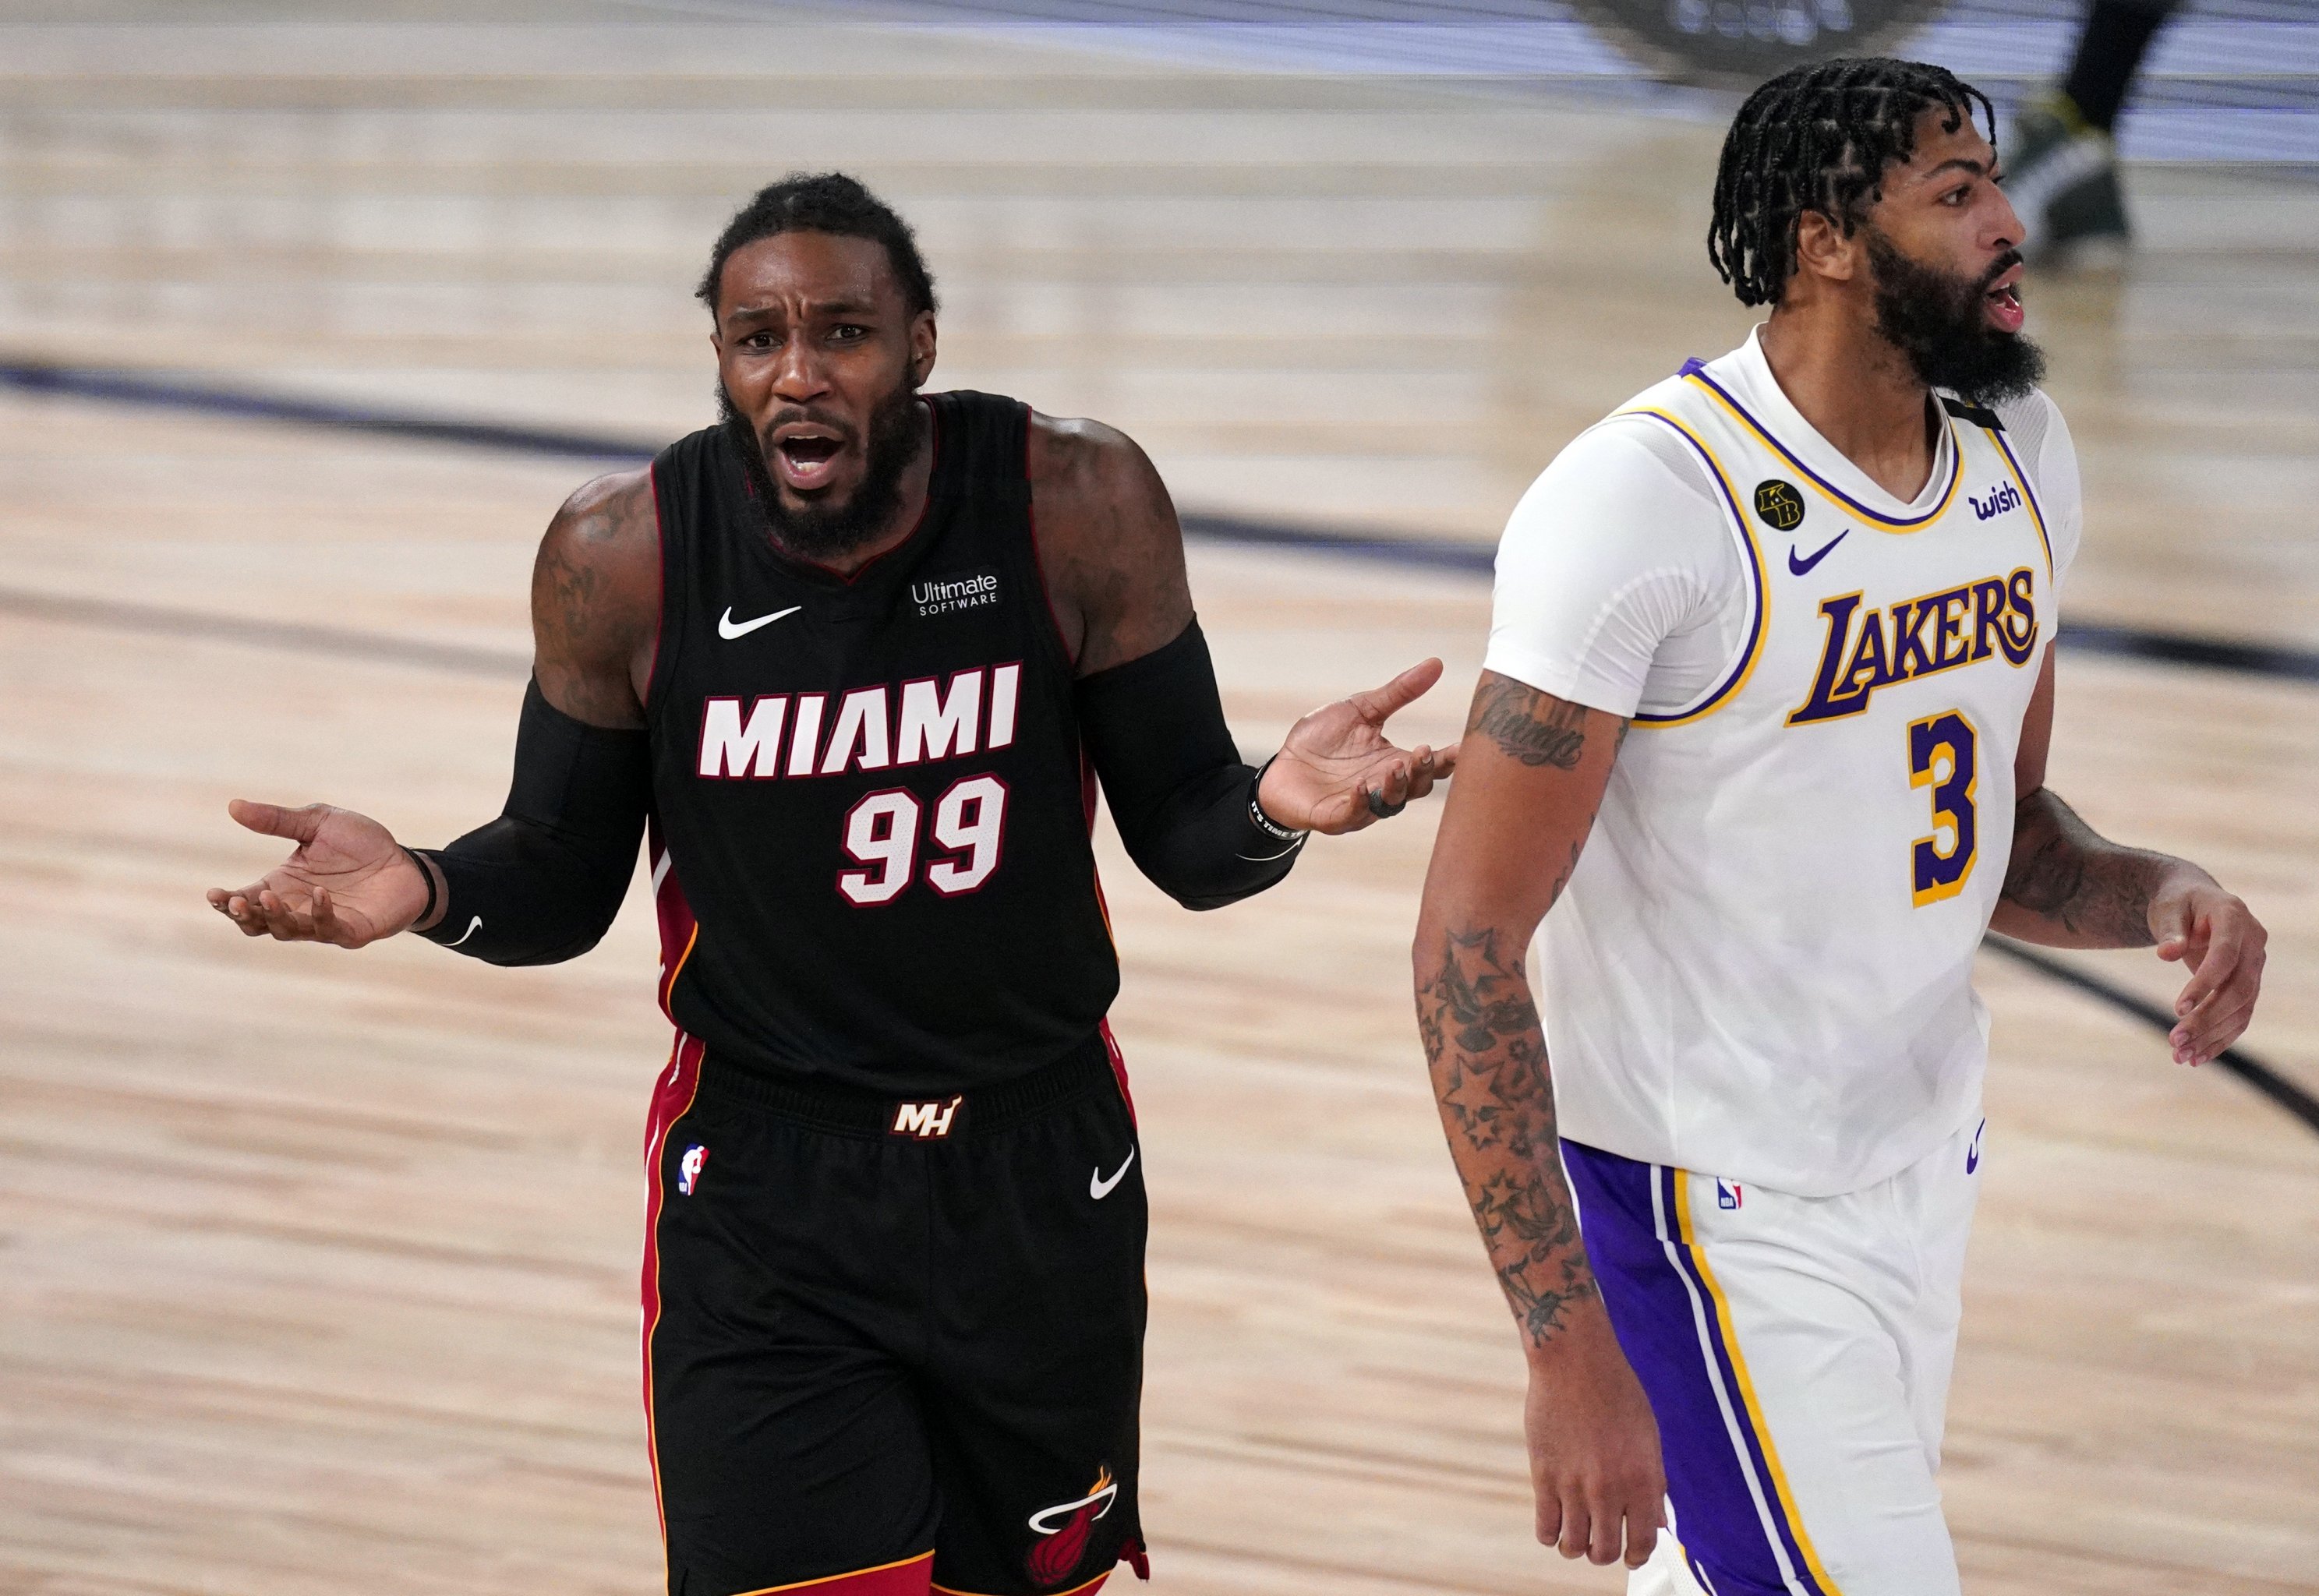 Miami Heat: Jae Crowder is embracing the moment versus his old team